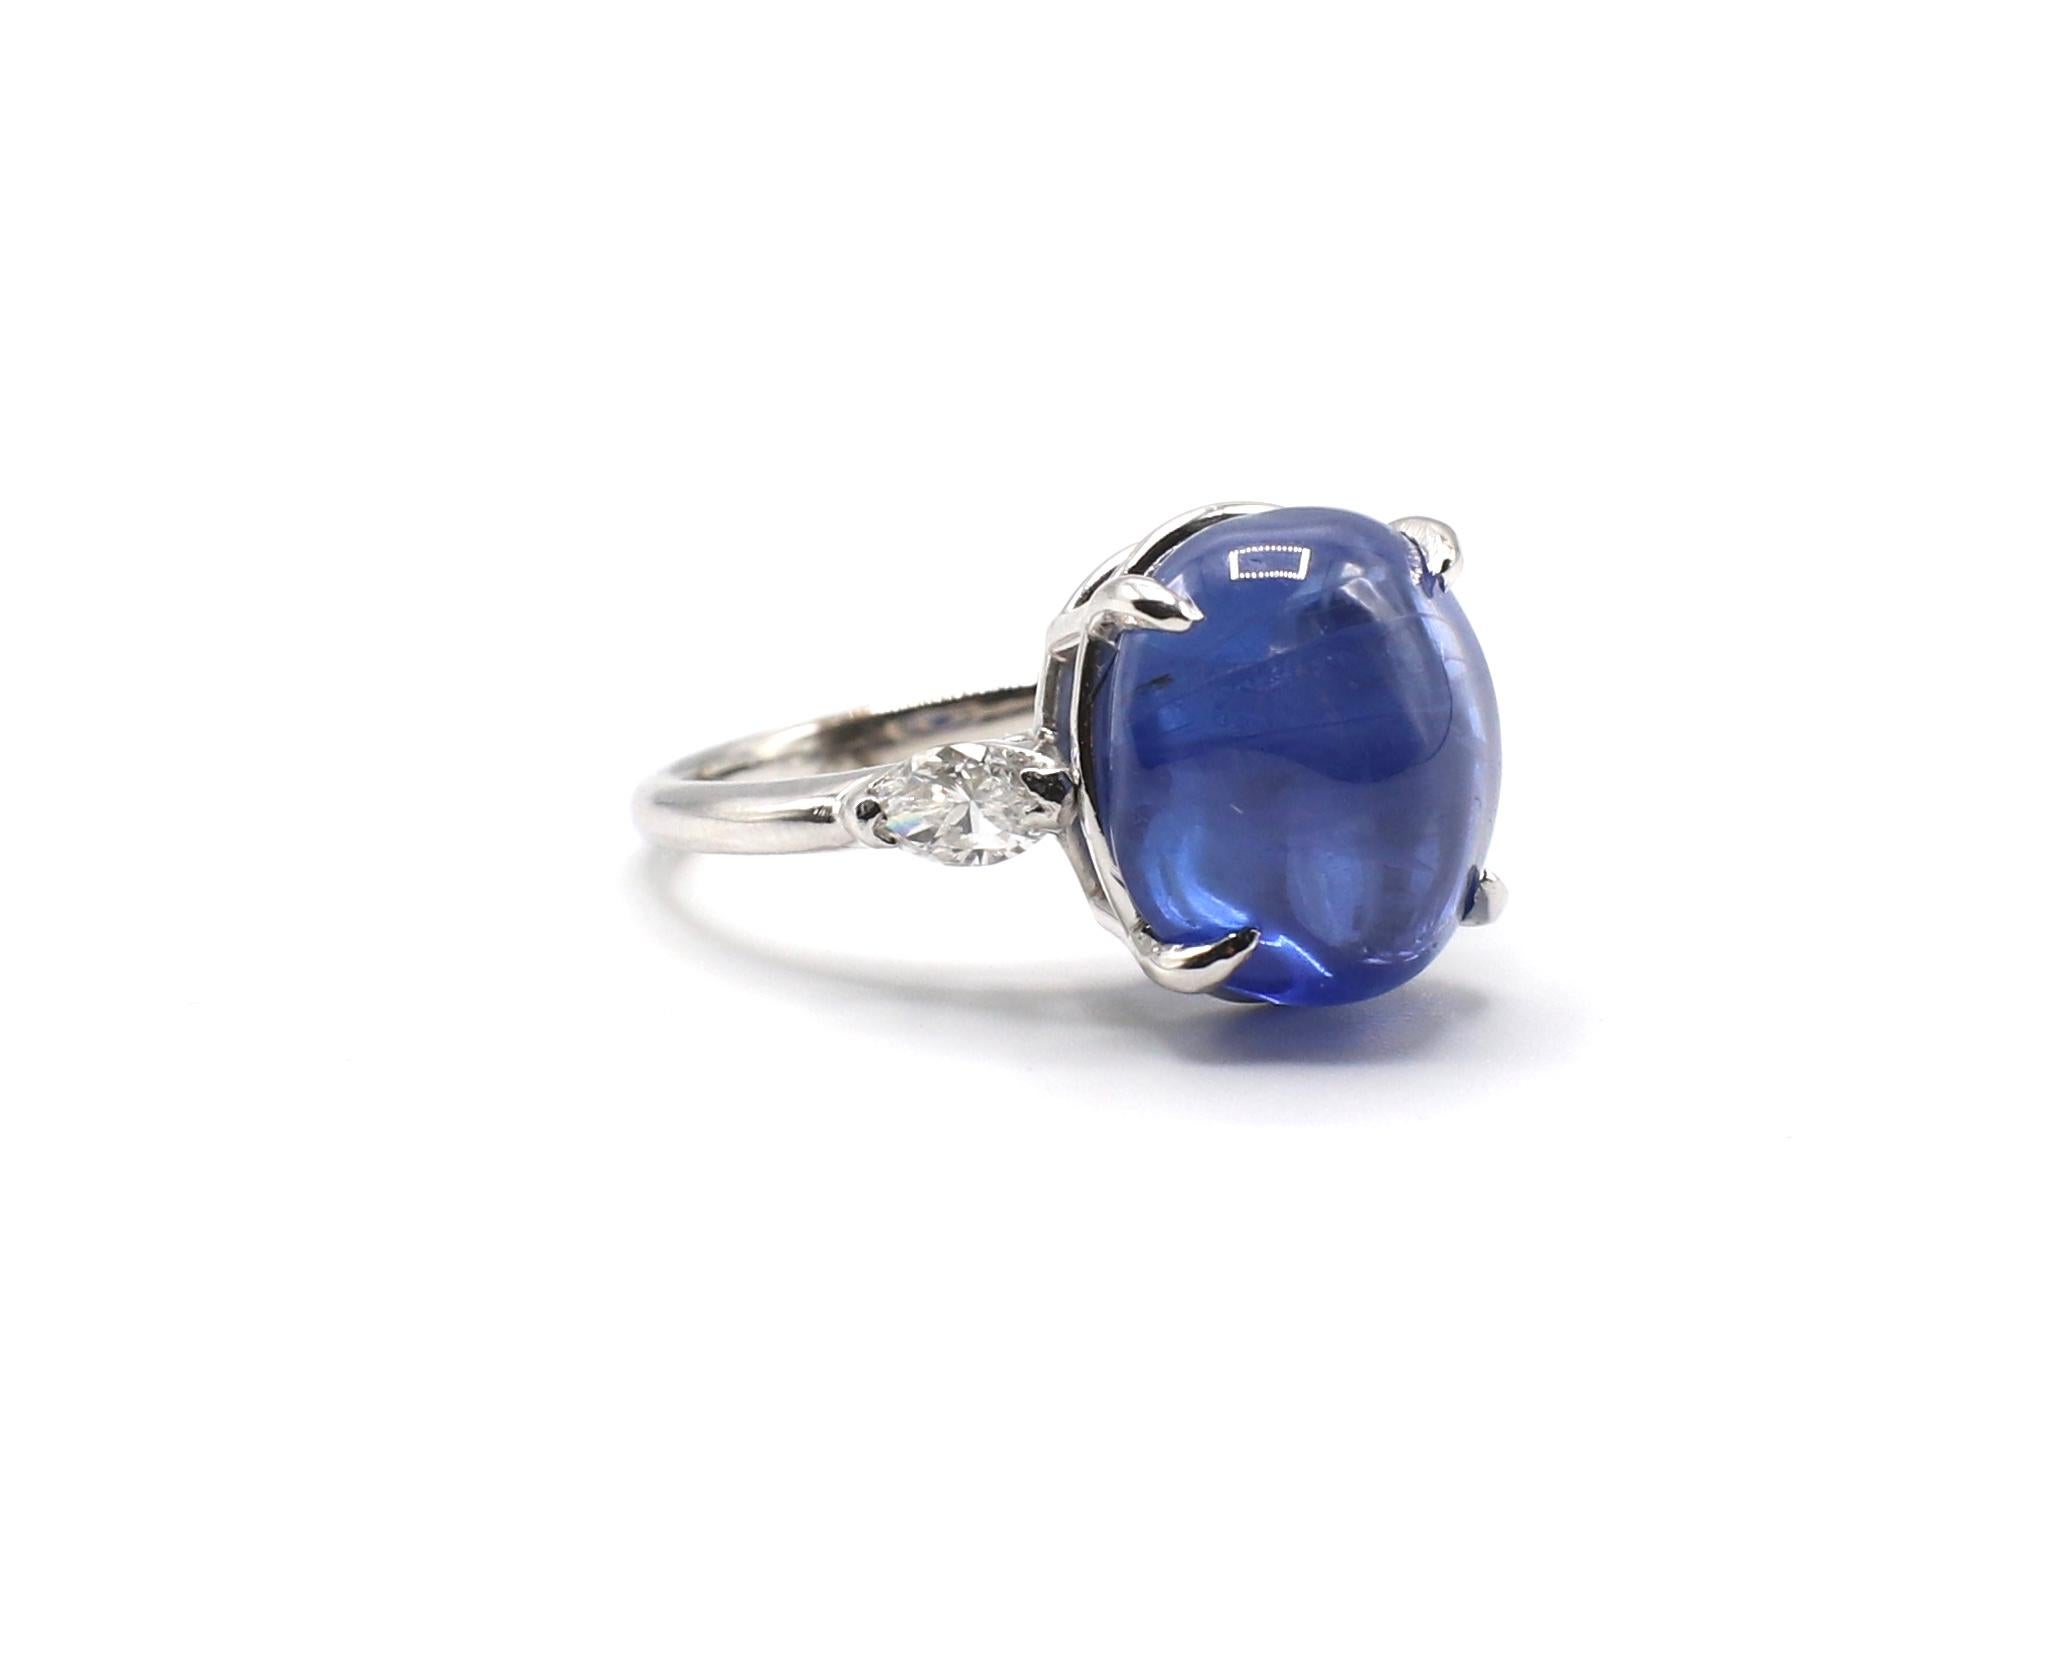 Sugarloaf Cabochon Platinum Blue Sapphire Cabochon and Diamond Dome Cocktail Ring